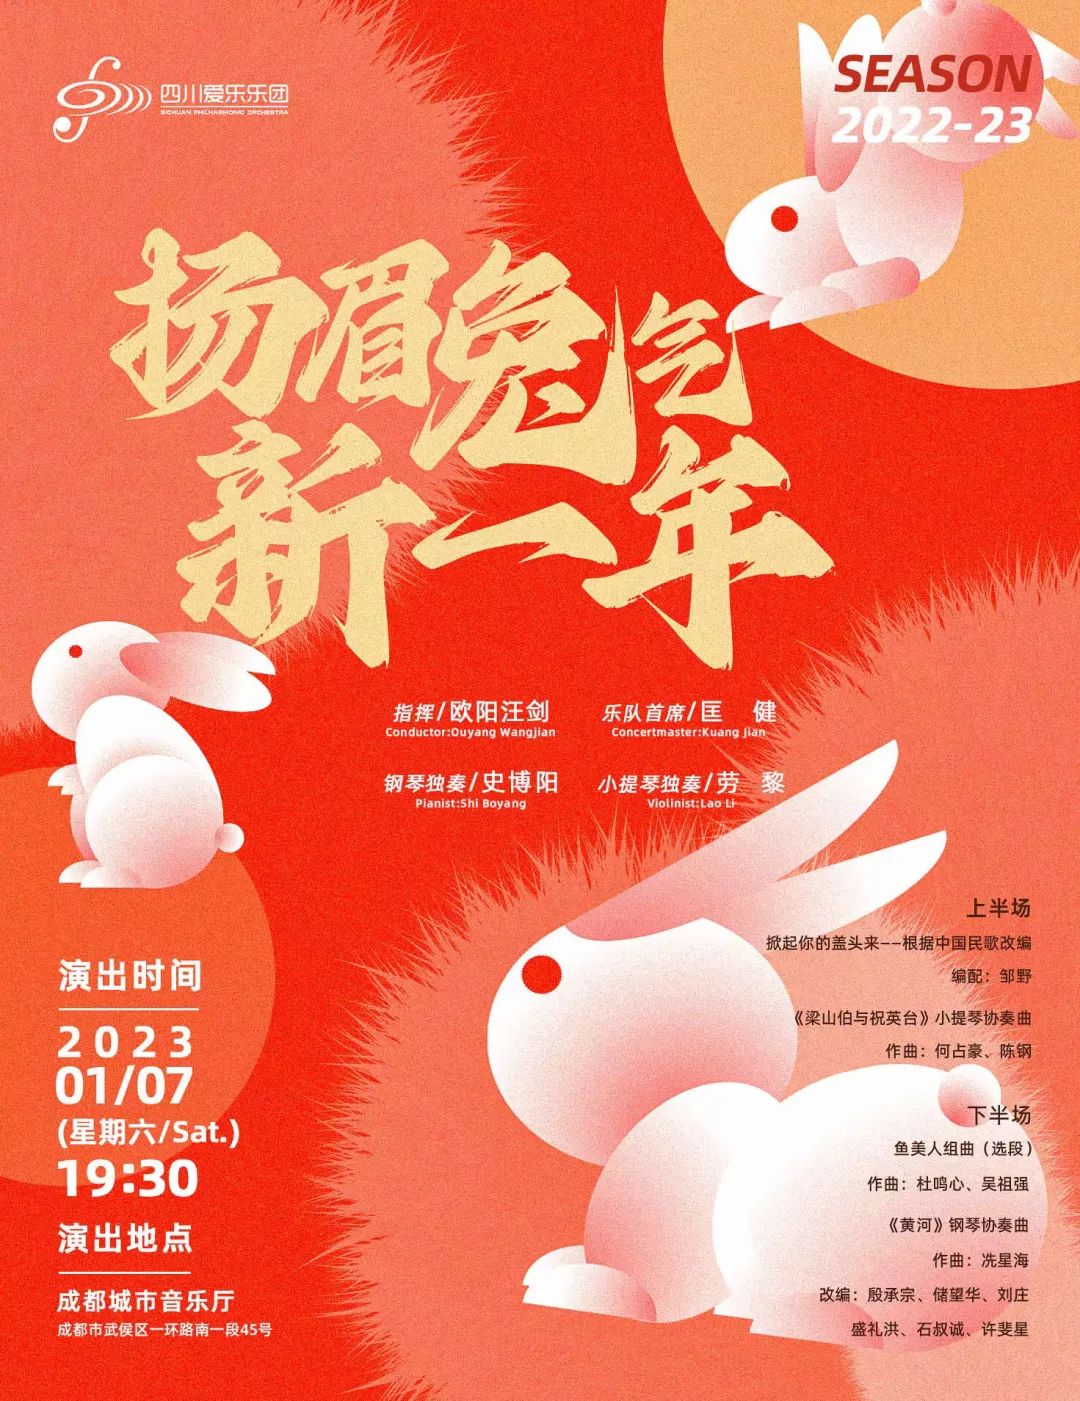 Concert to celebrate the New Year of the Rabbit 